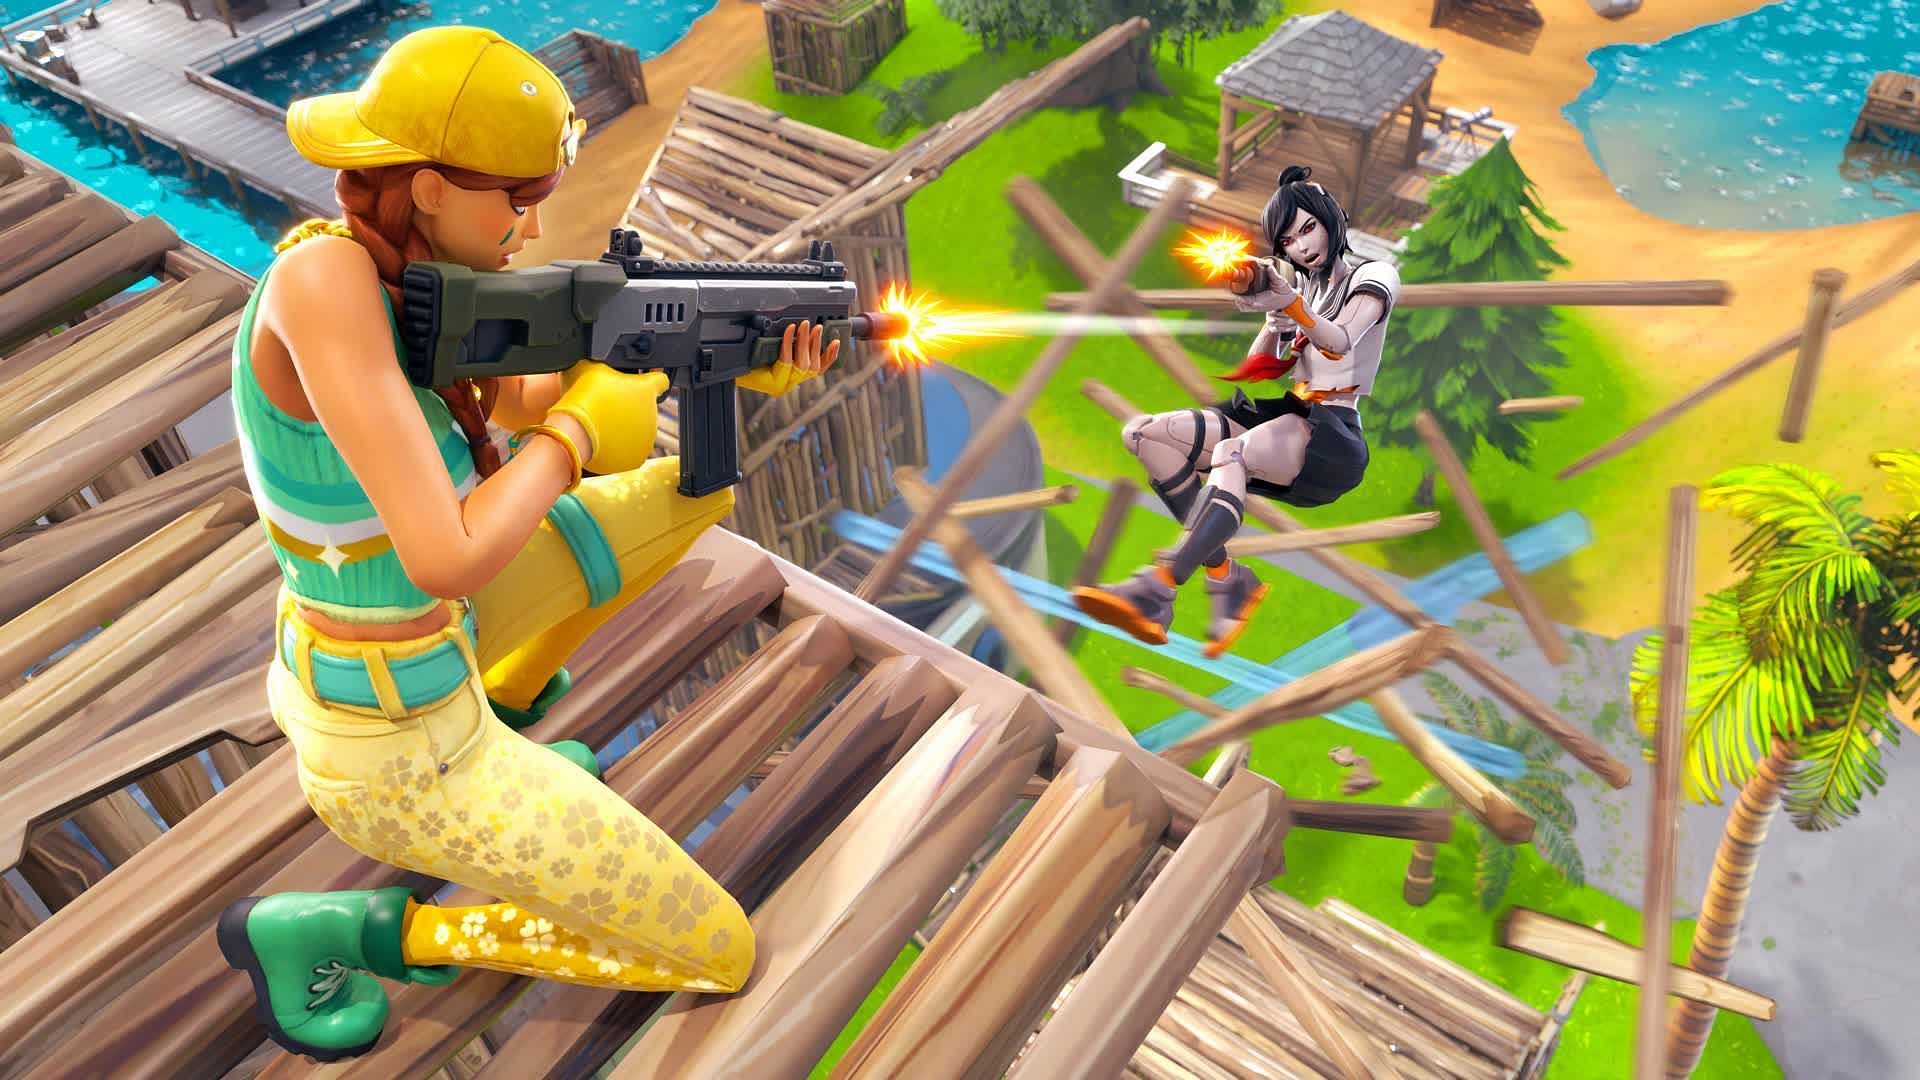 Matchmaking has been one of the most popular subjects since Fortnite Chapter 2 (Image via Epic Games)